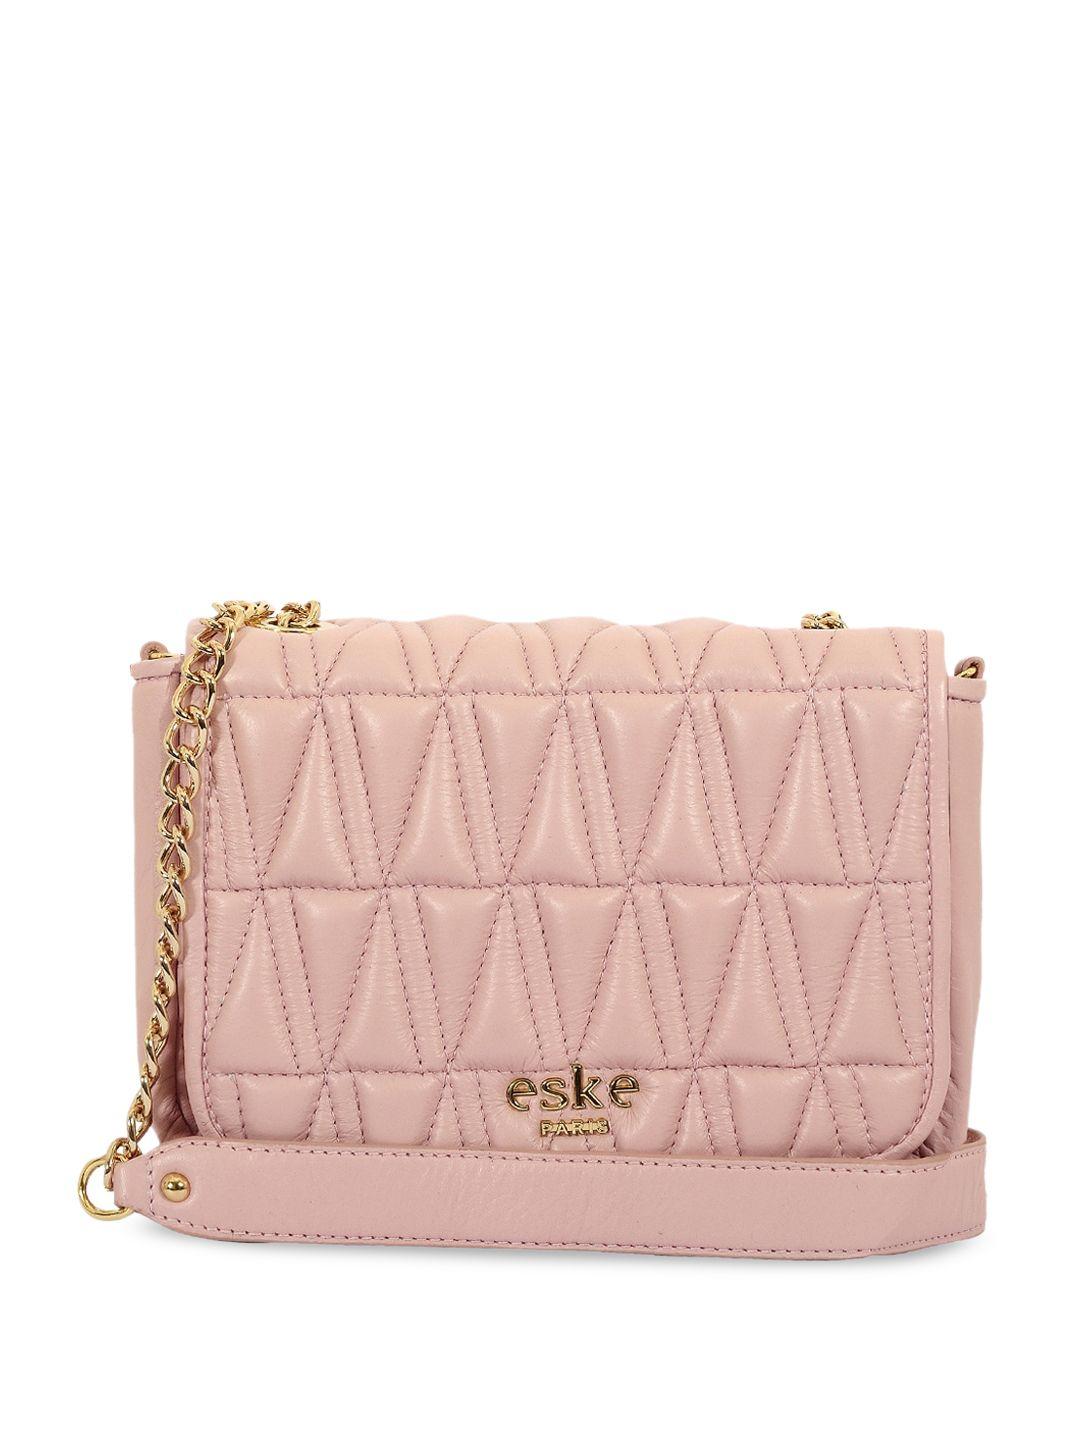 eske rose textured leather structured sling bag with quilted